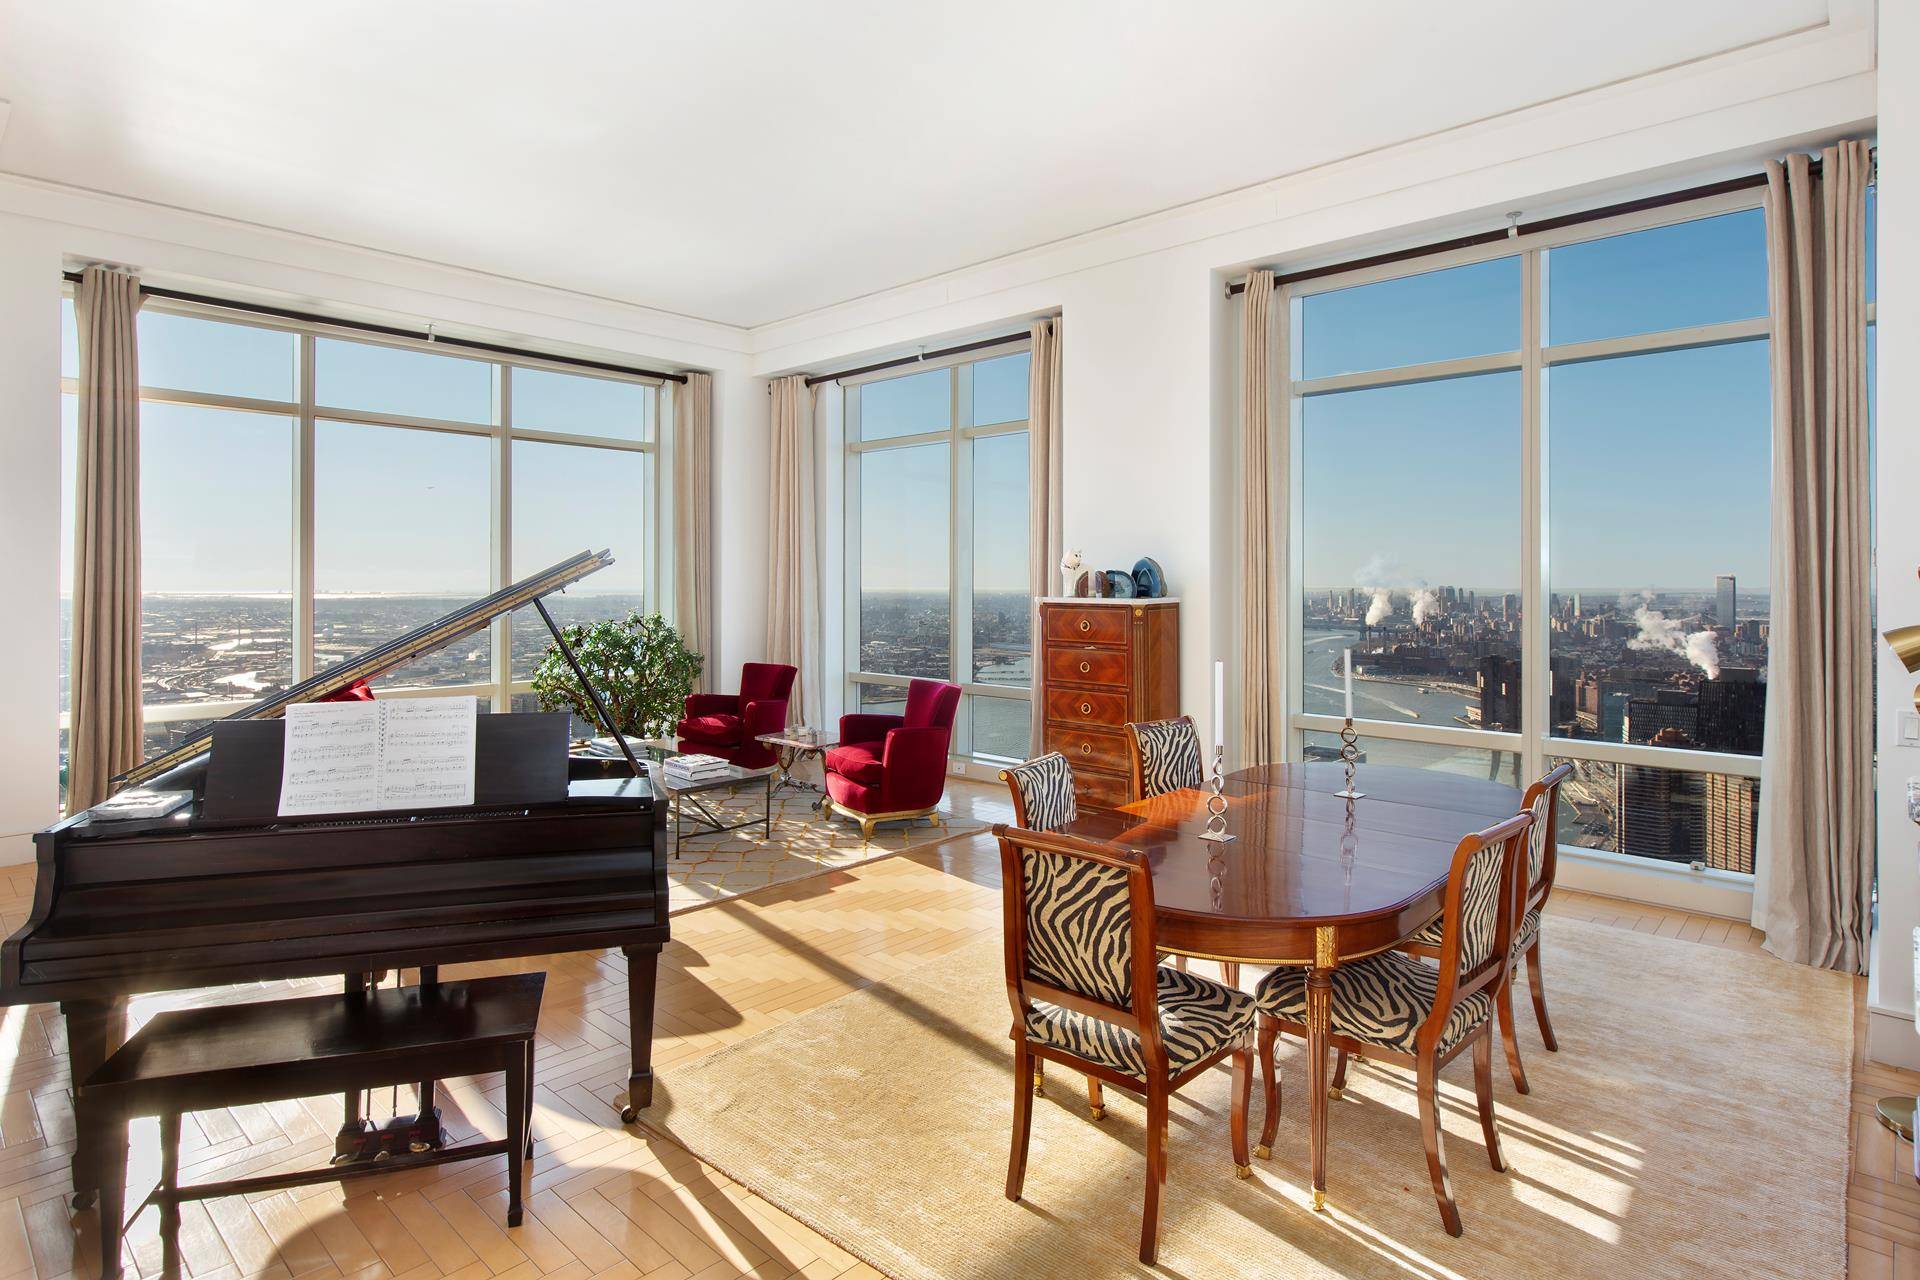 Welcome Home to this exceptional 82nd Floor 3 4 bedroom, 3.